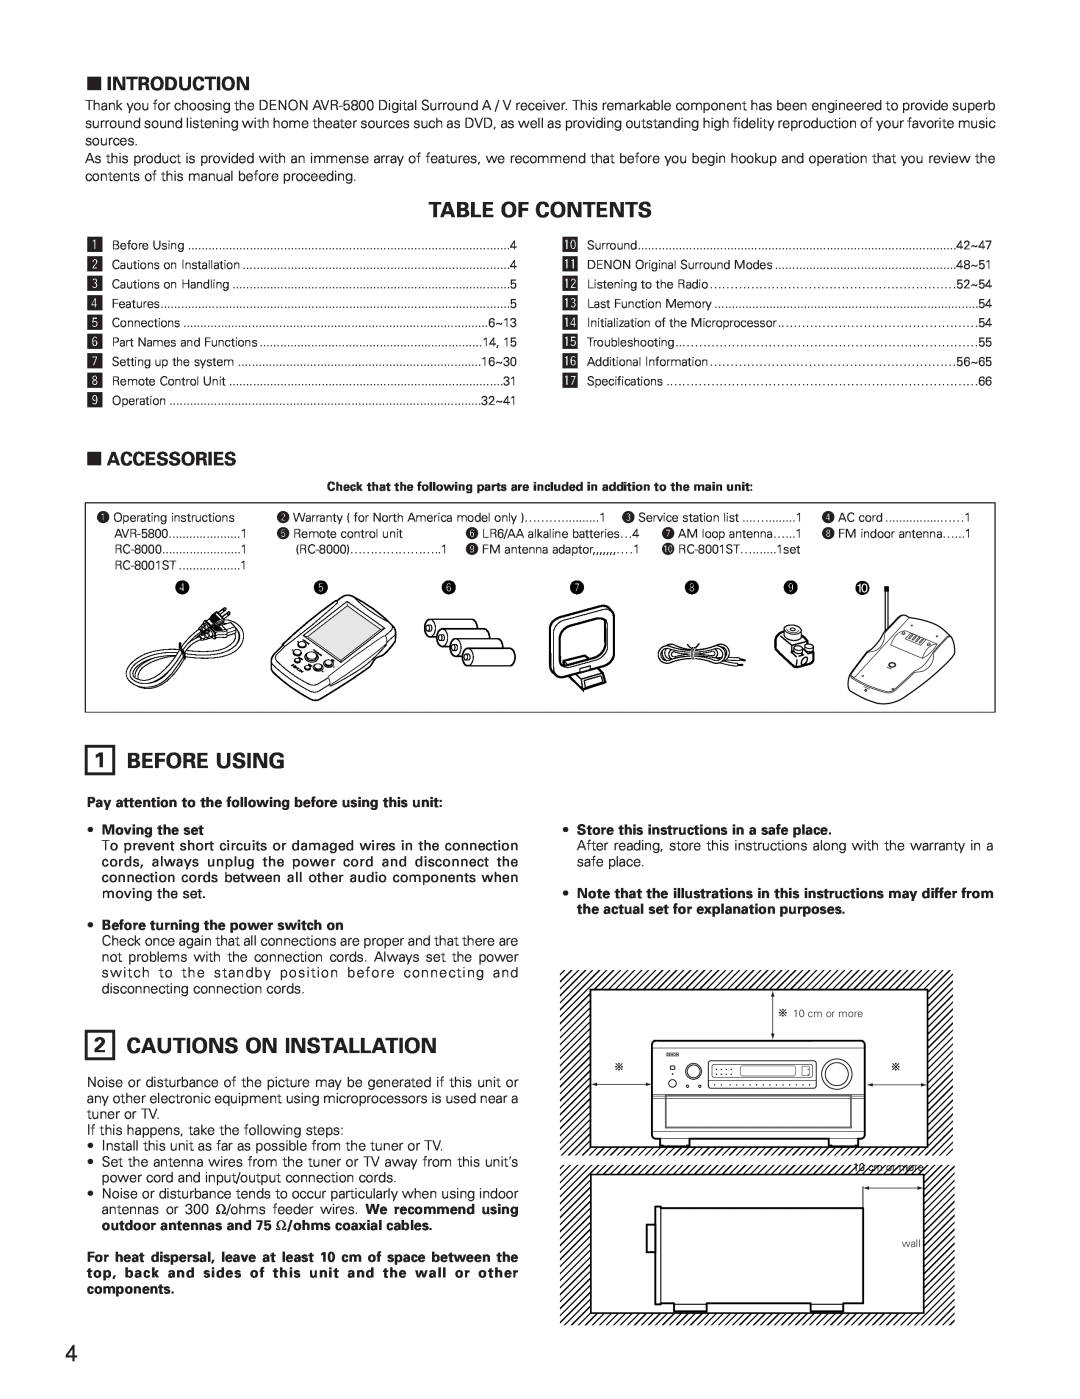 Denon AVR-5800 Table Of Contents, Before Using, Cautions On Installation, 2INTRODUCTION, 2ACCESSORIES, Moving the set 